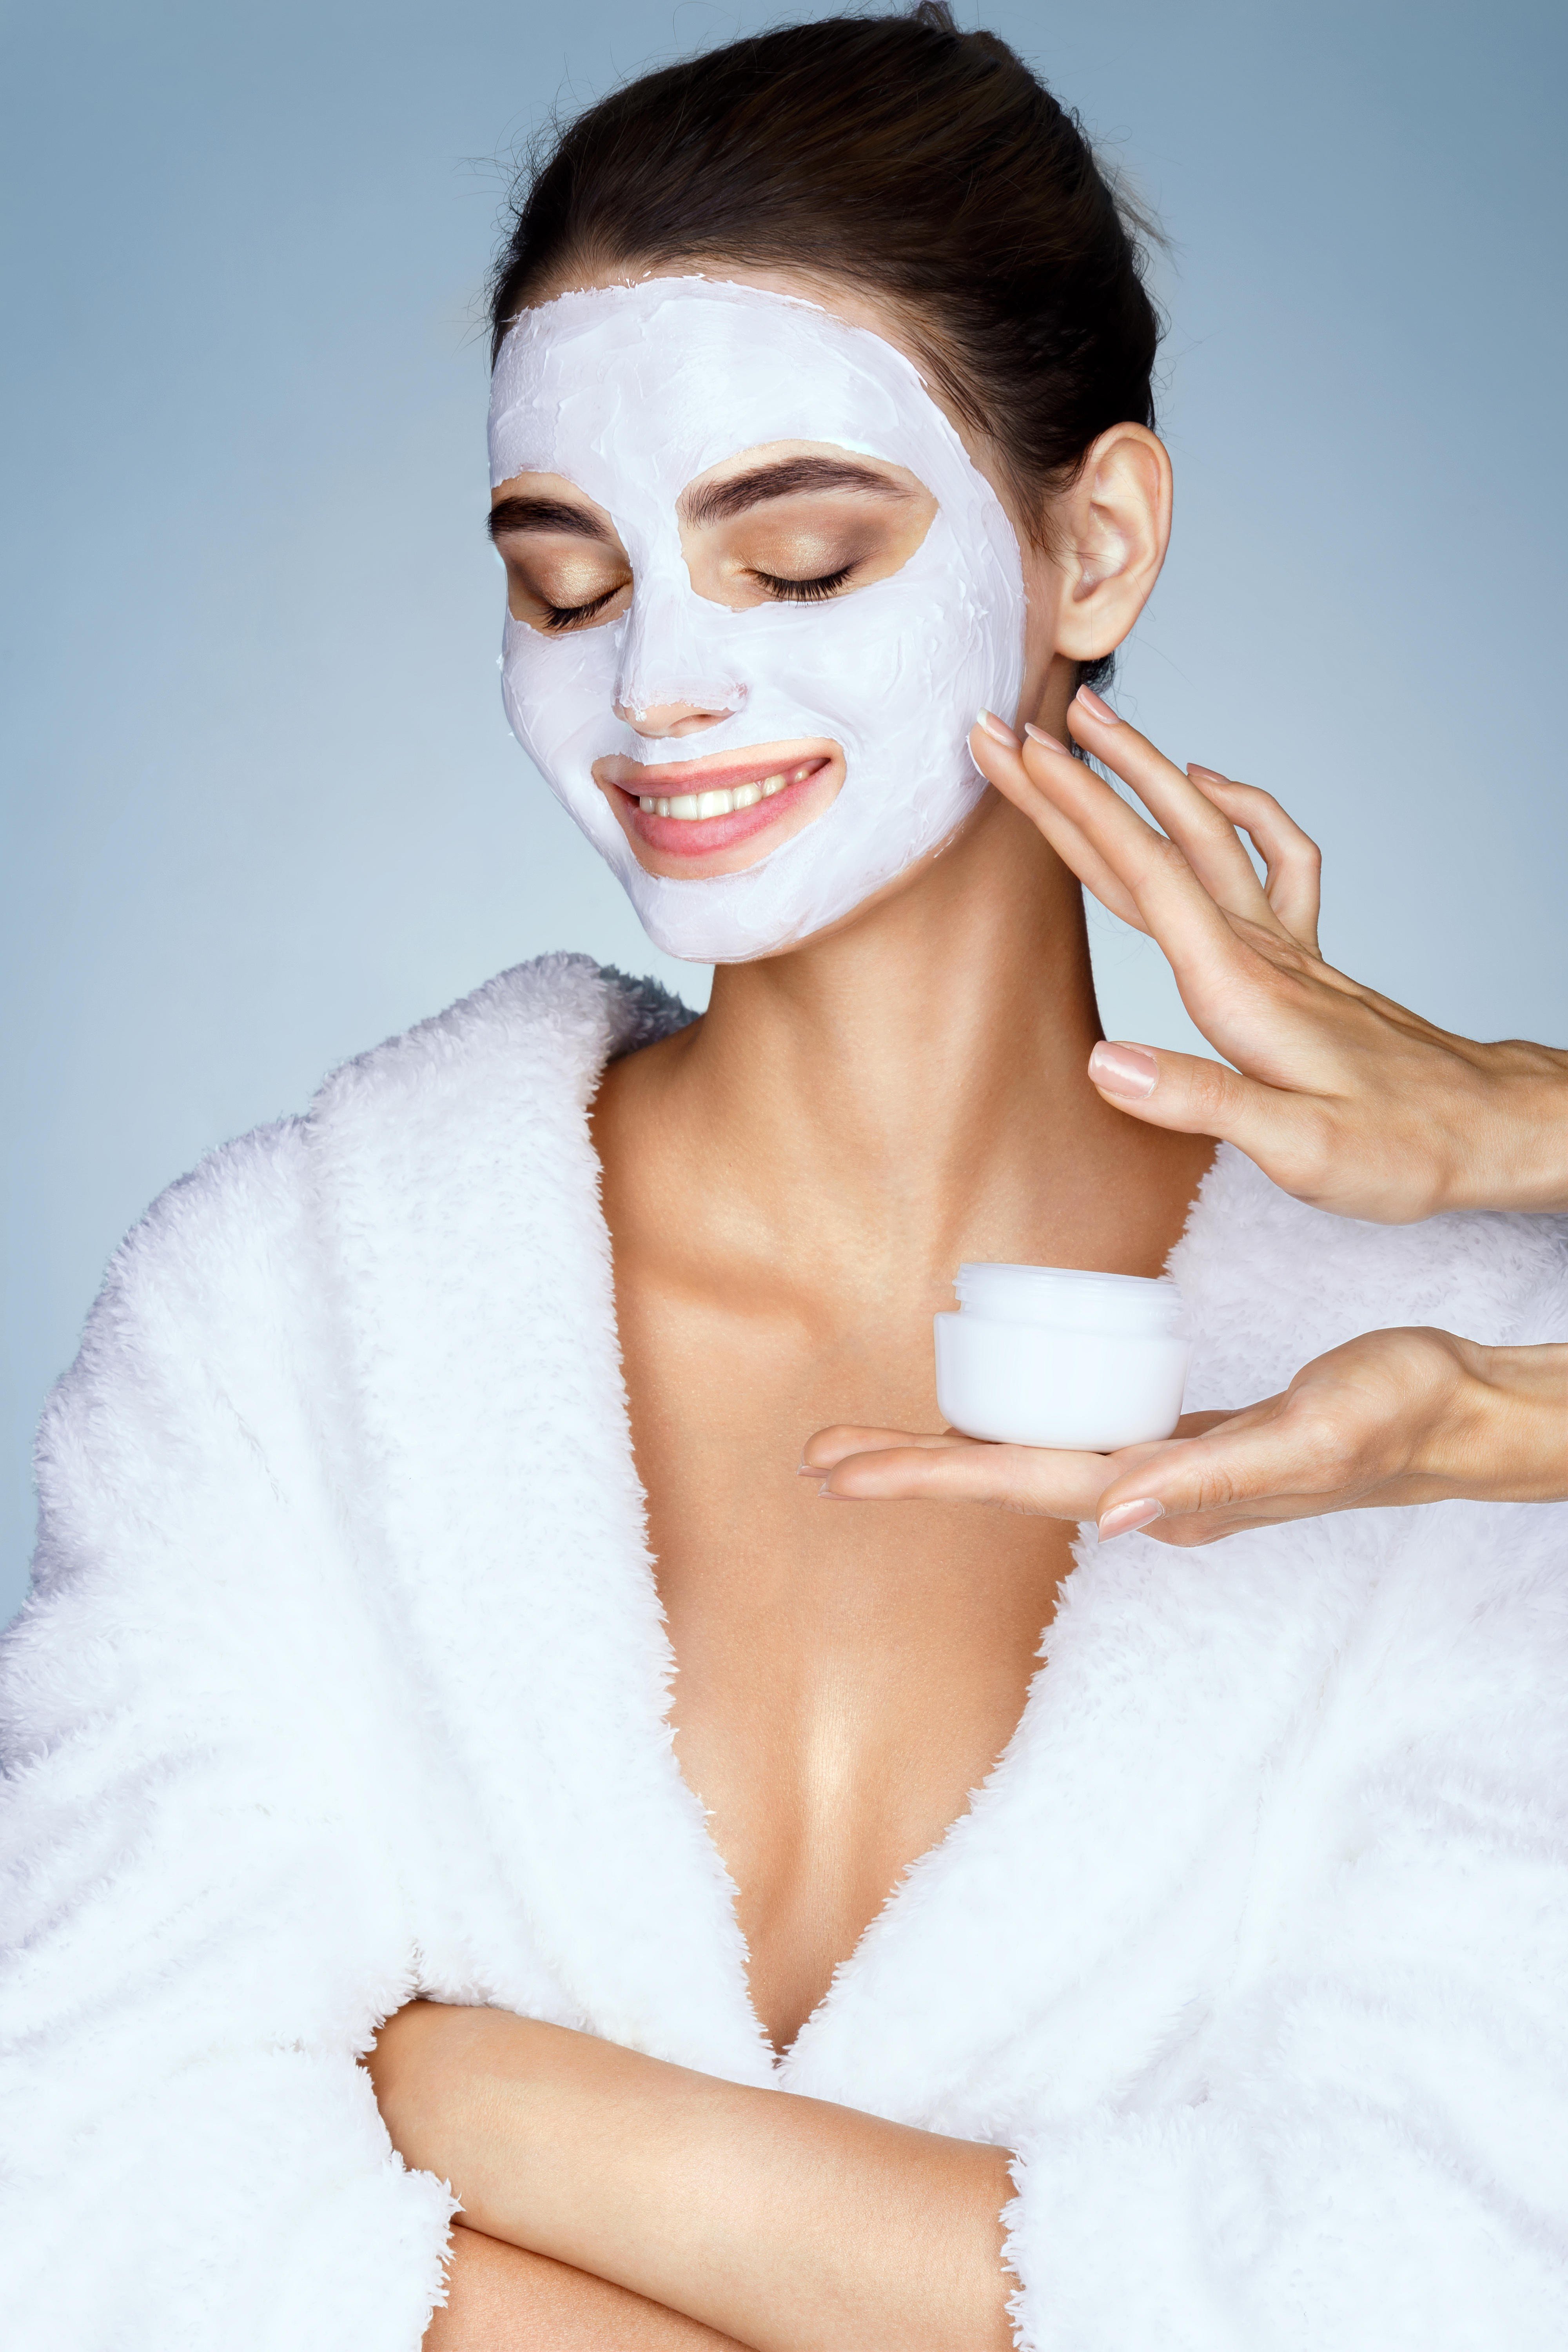 Clay masks can de-clog pores and remove dirt, leaving the skin smooth and radiant.